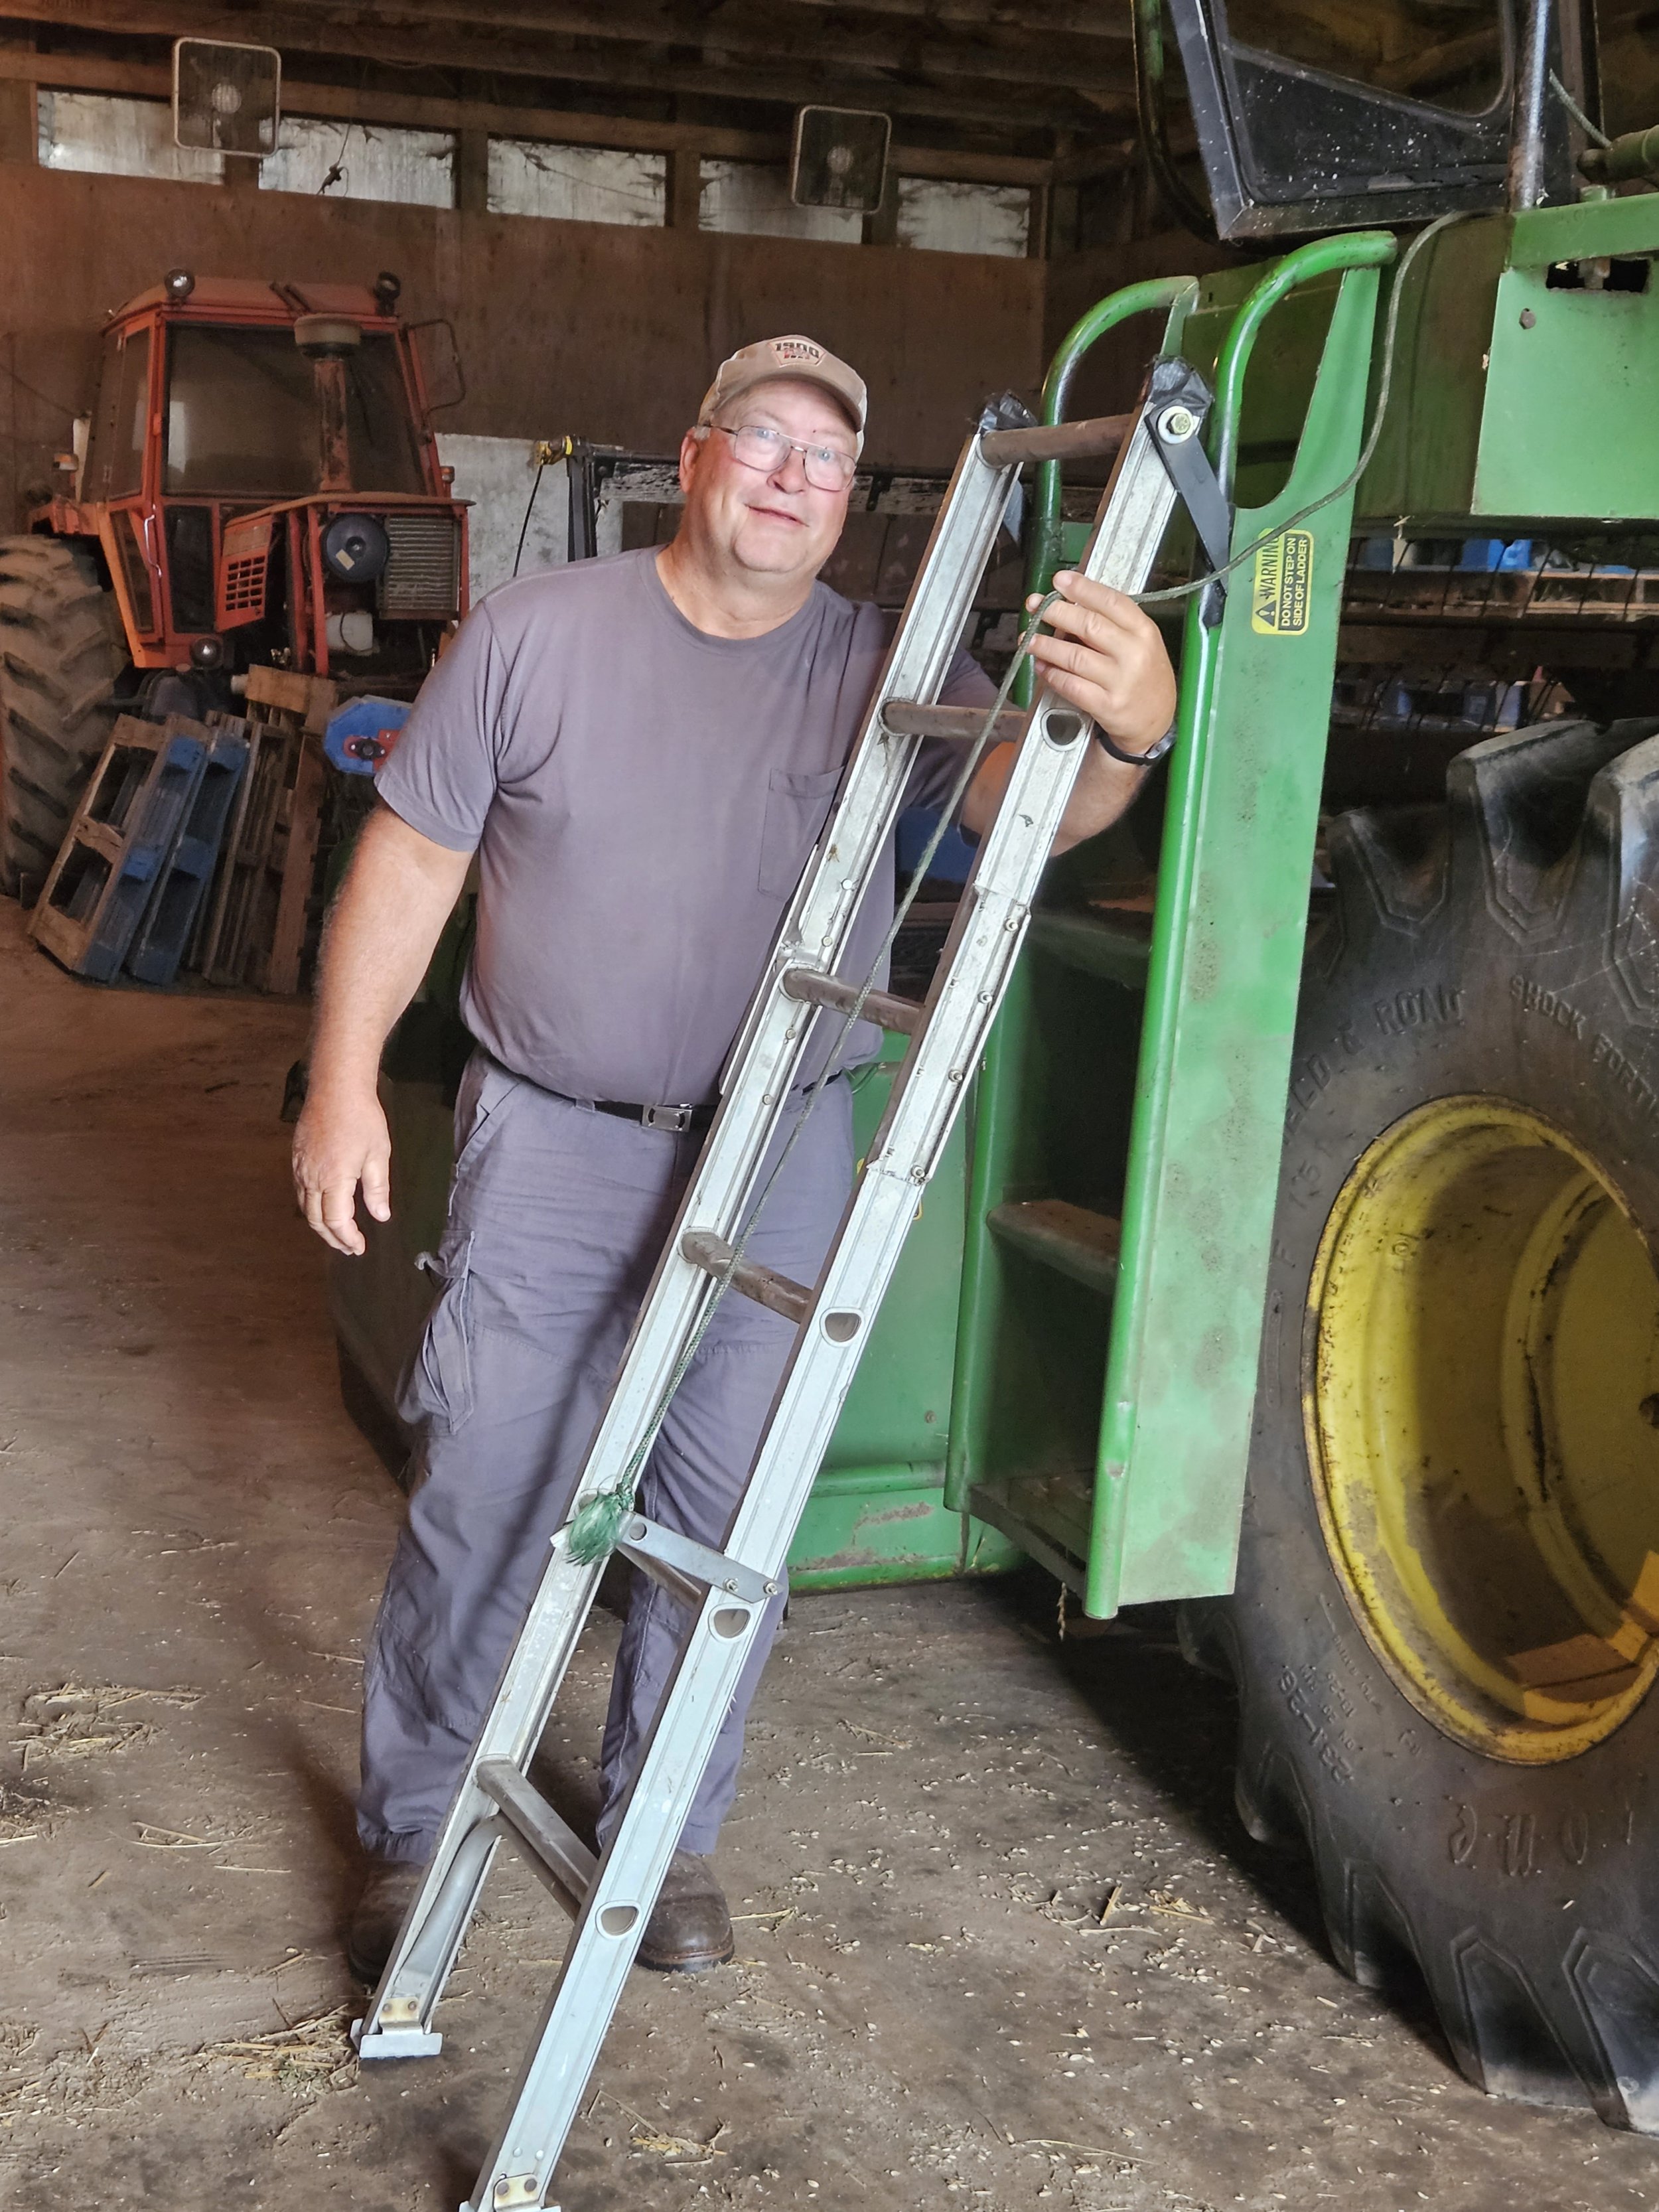   Simple and effective, Glen has created his own assistive technology to help him enter his combine easier. Once on the combine platform, he can pull up the ladder and attach it to the existing ladder while working in the field.  